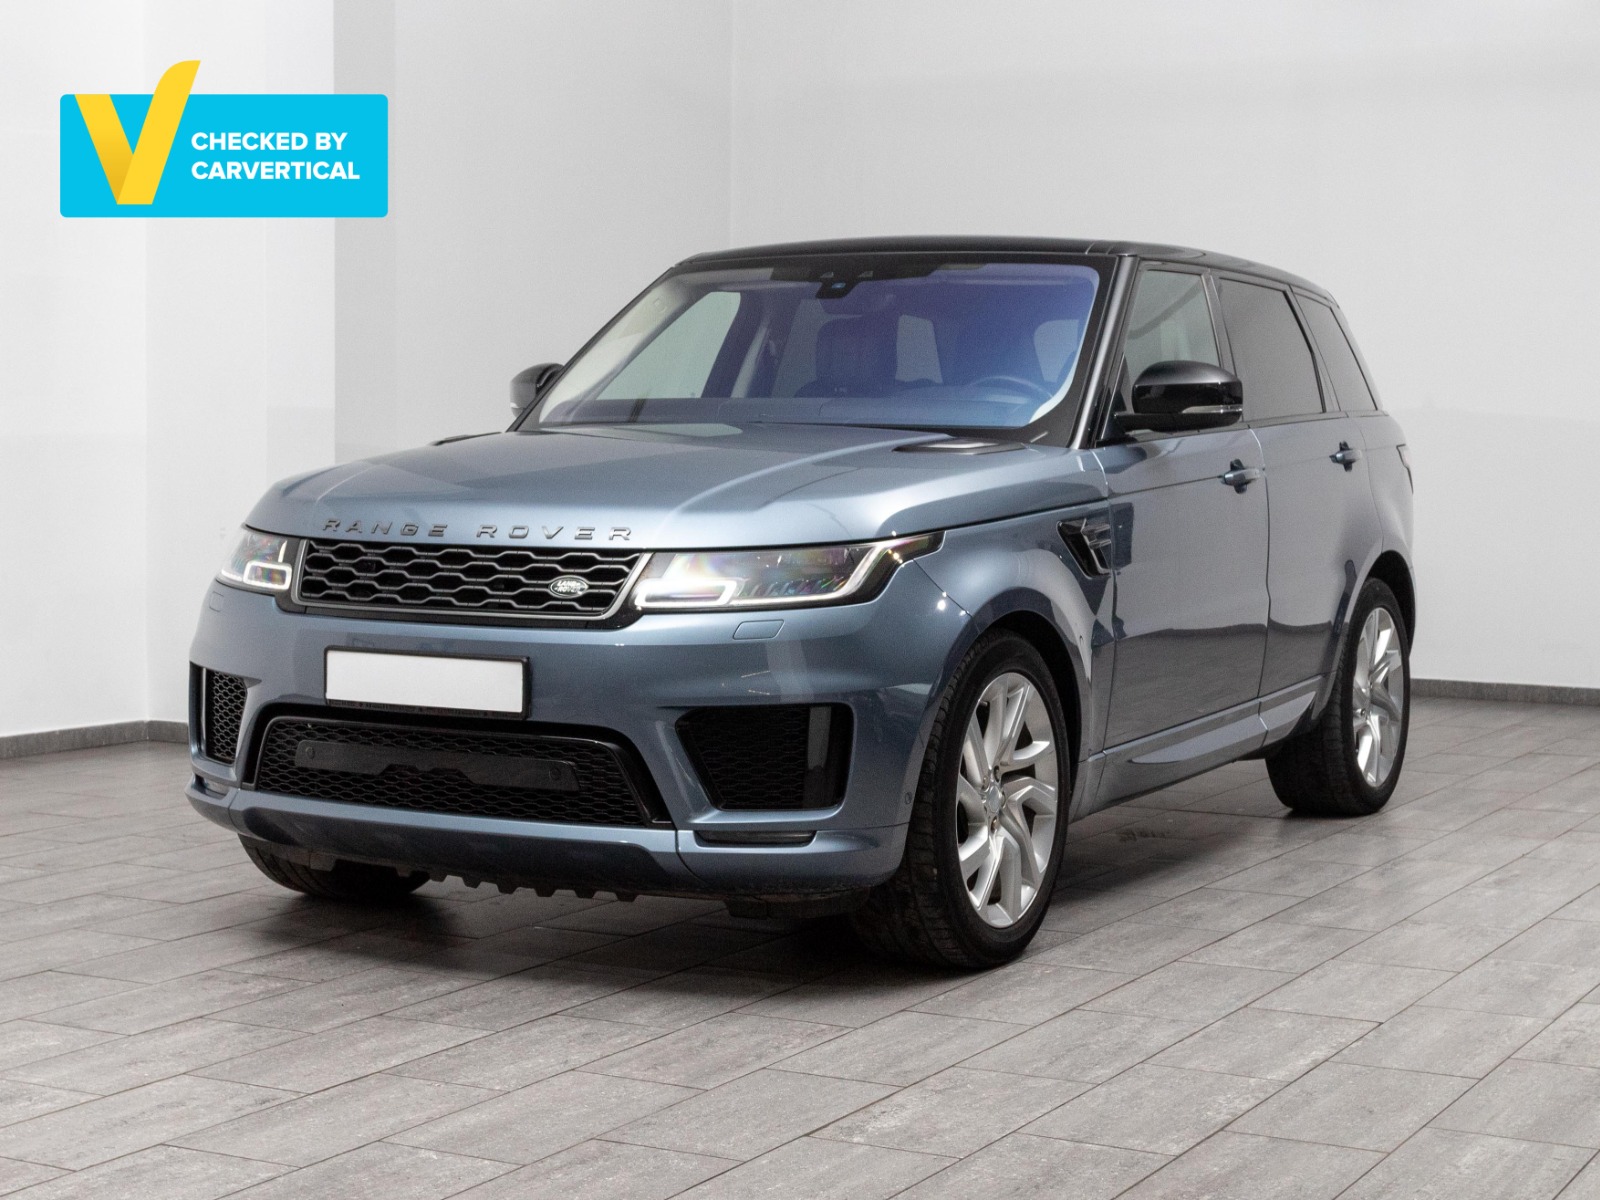 Land Rover Range Rover Sport 3.0 TDV6 HSE Automatic